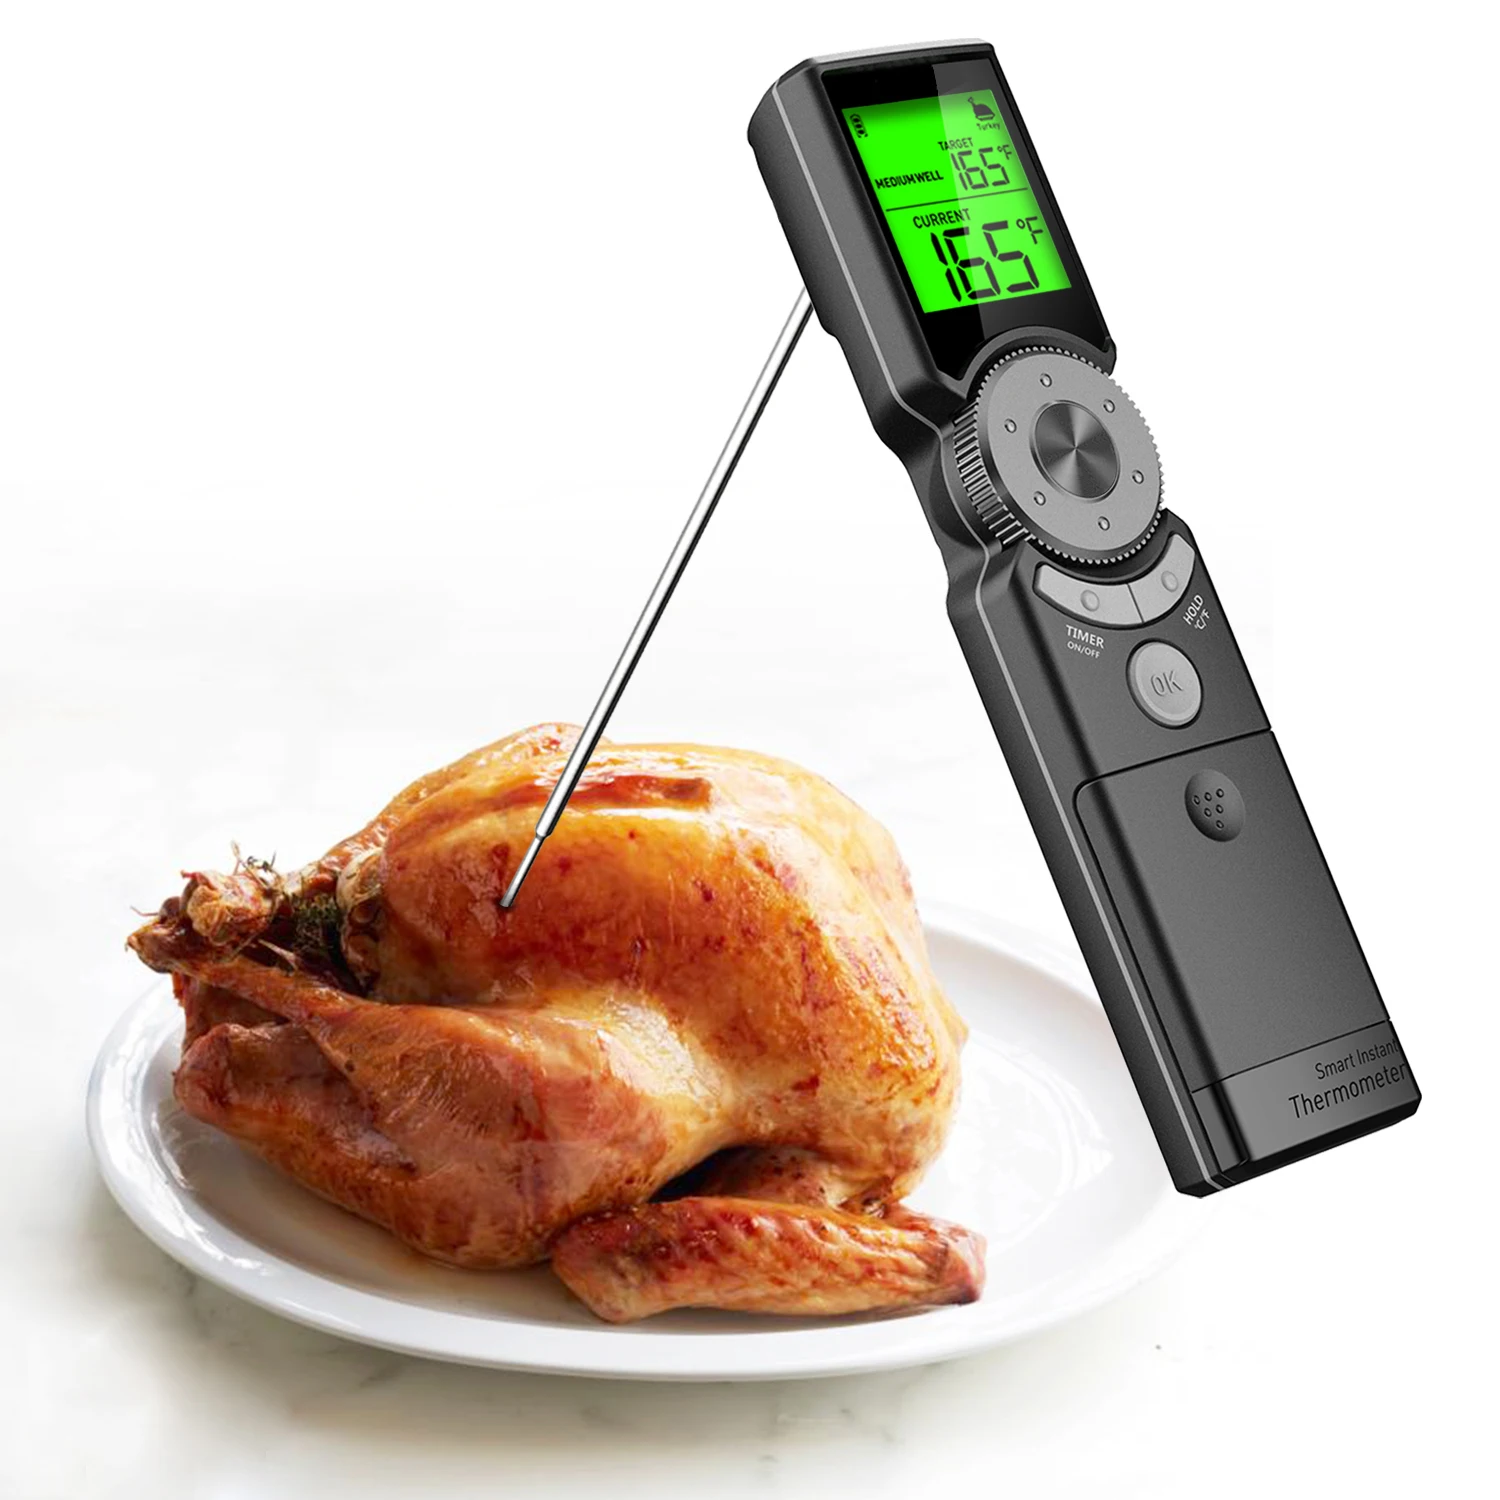 

2020 Waterproof Digital Folding Instant Read Red Meat Thermometer Kitchen Cooking Candy Food Thermometer For BBQ Grill Oven, Black/orange customized